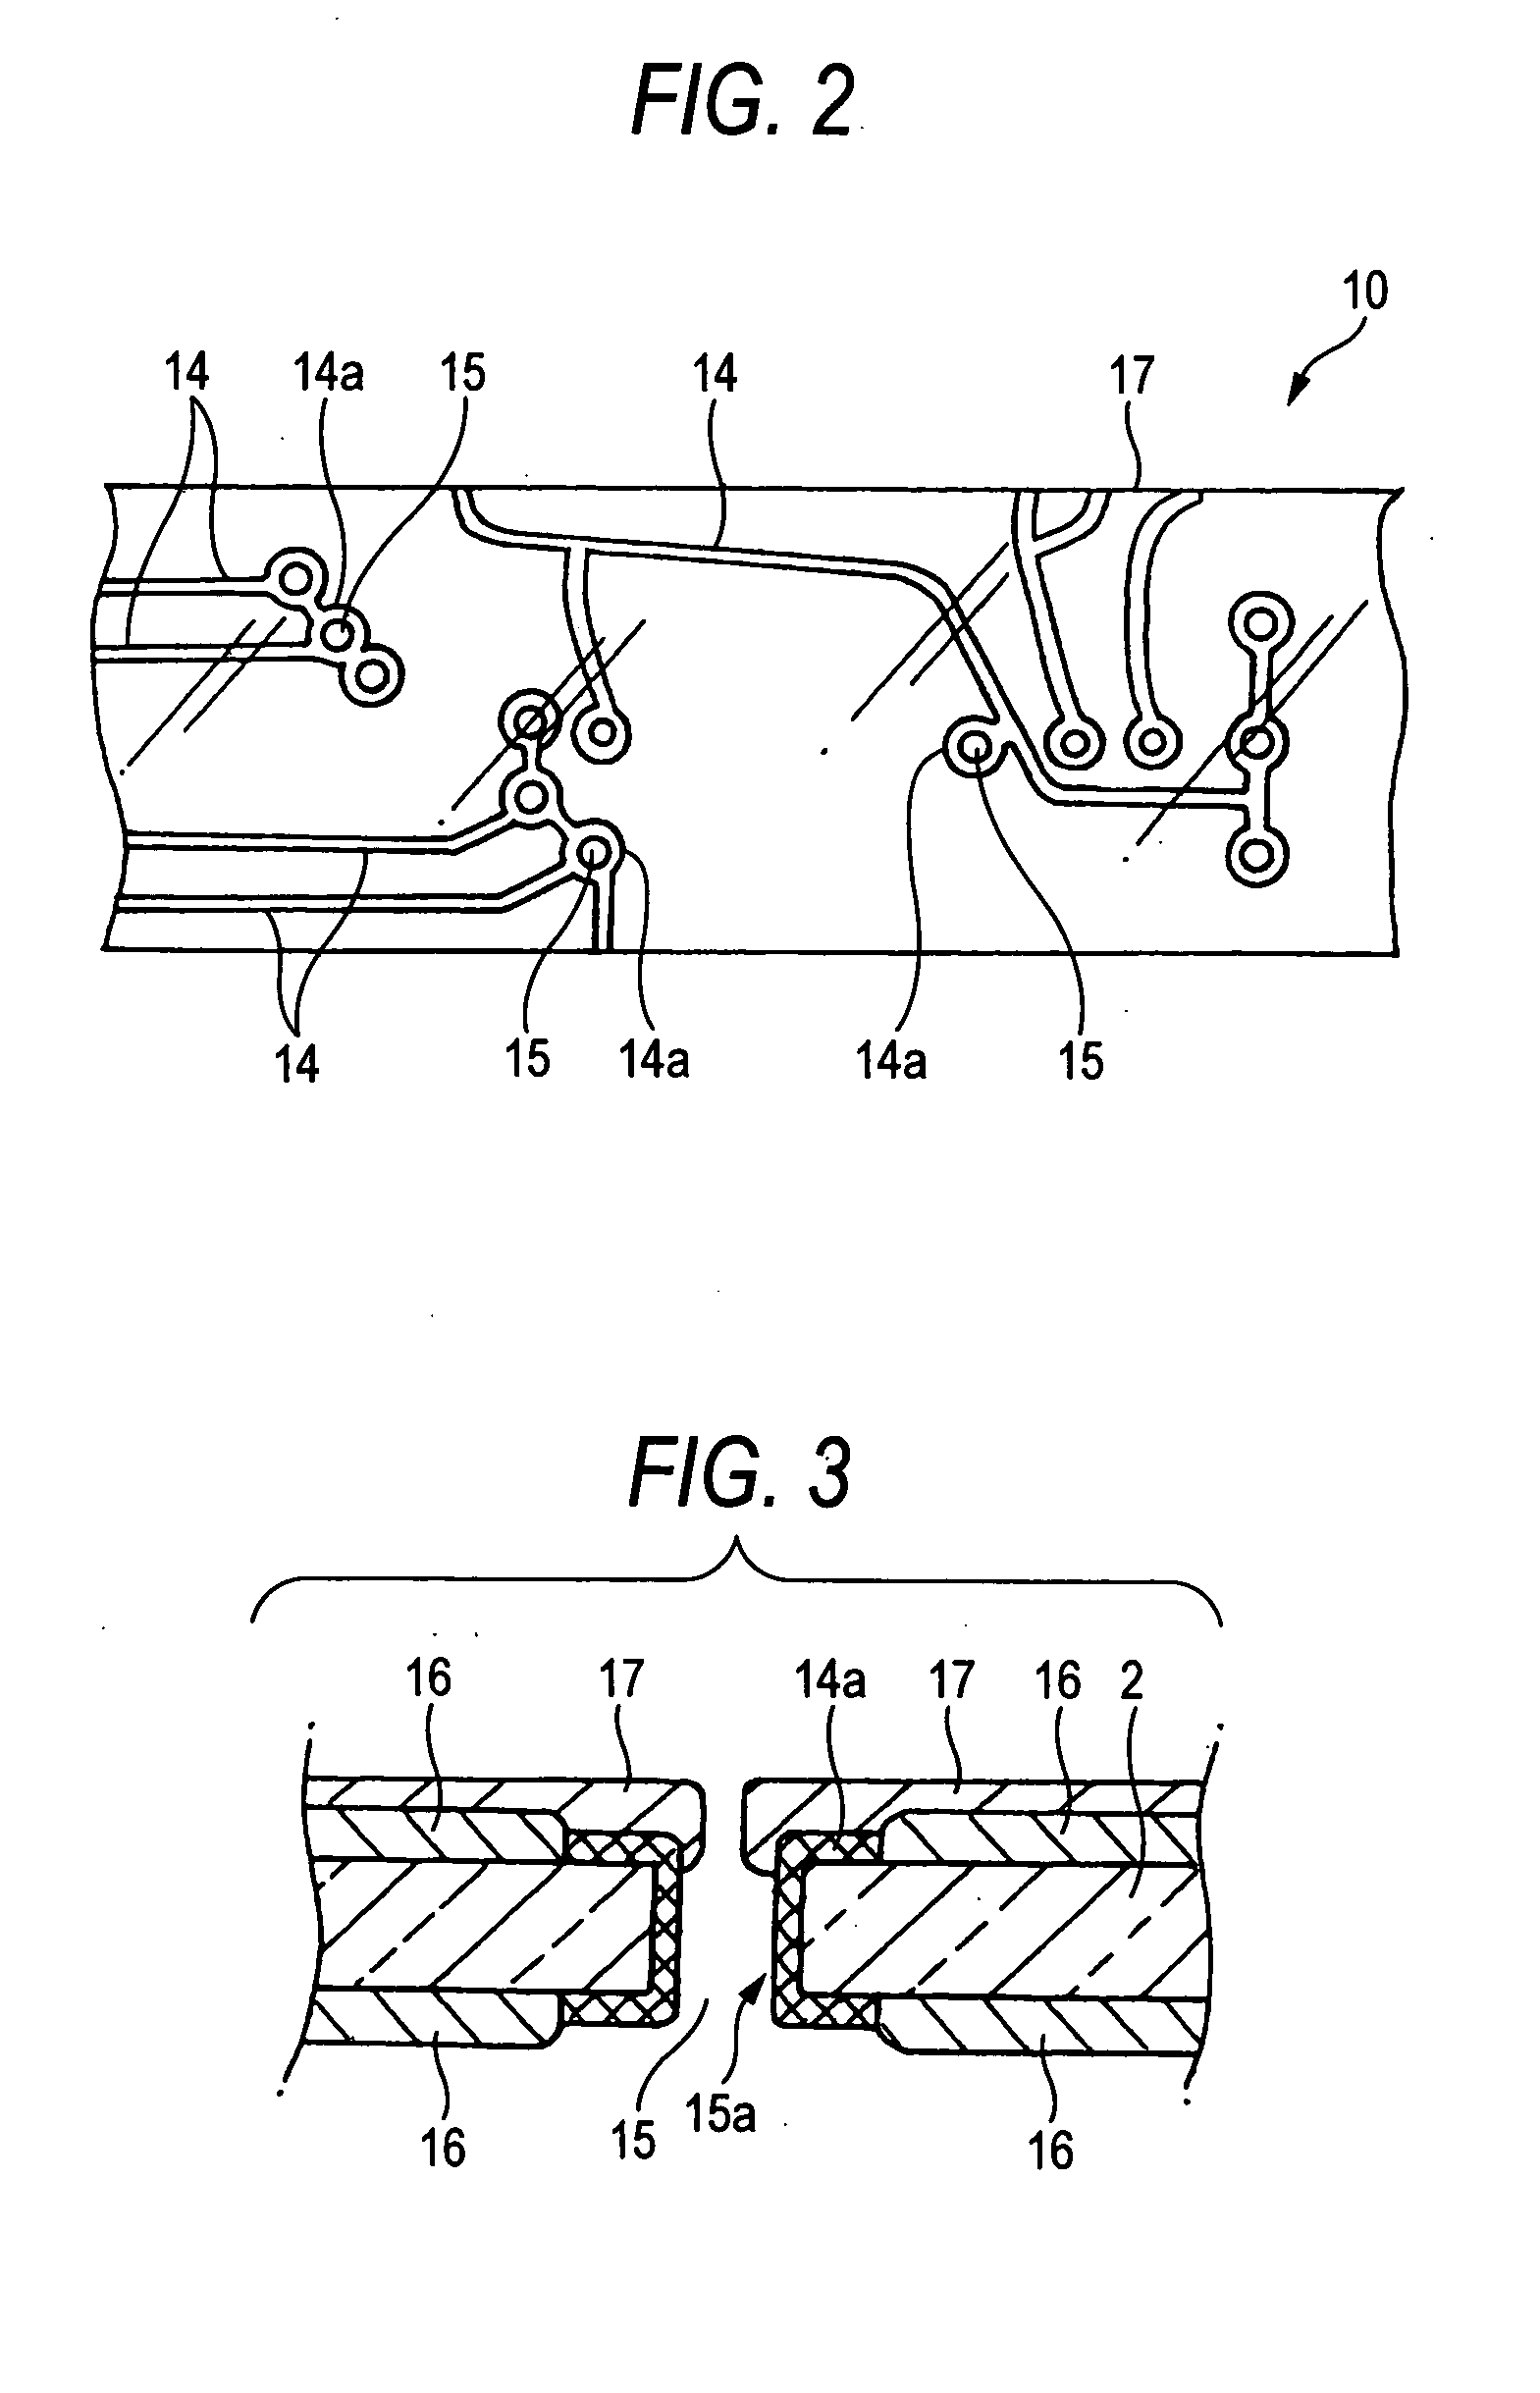 Printed board and electronic apparatus